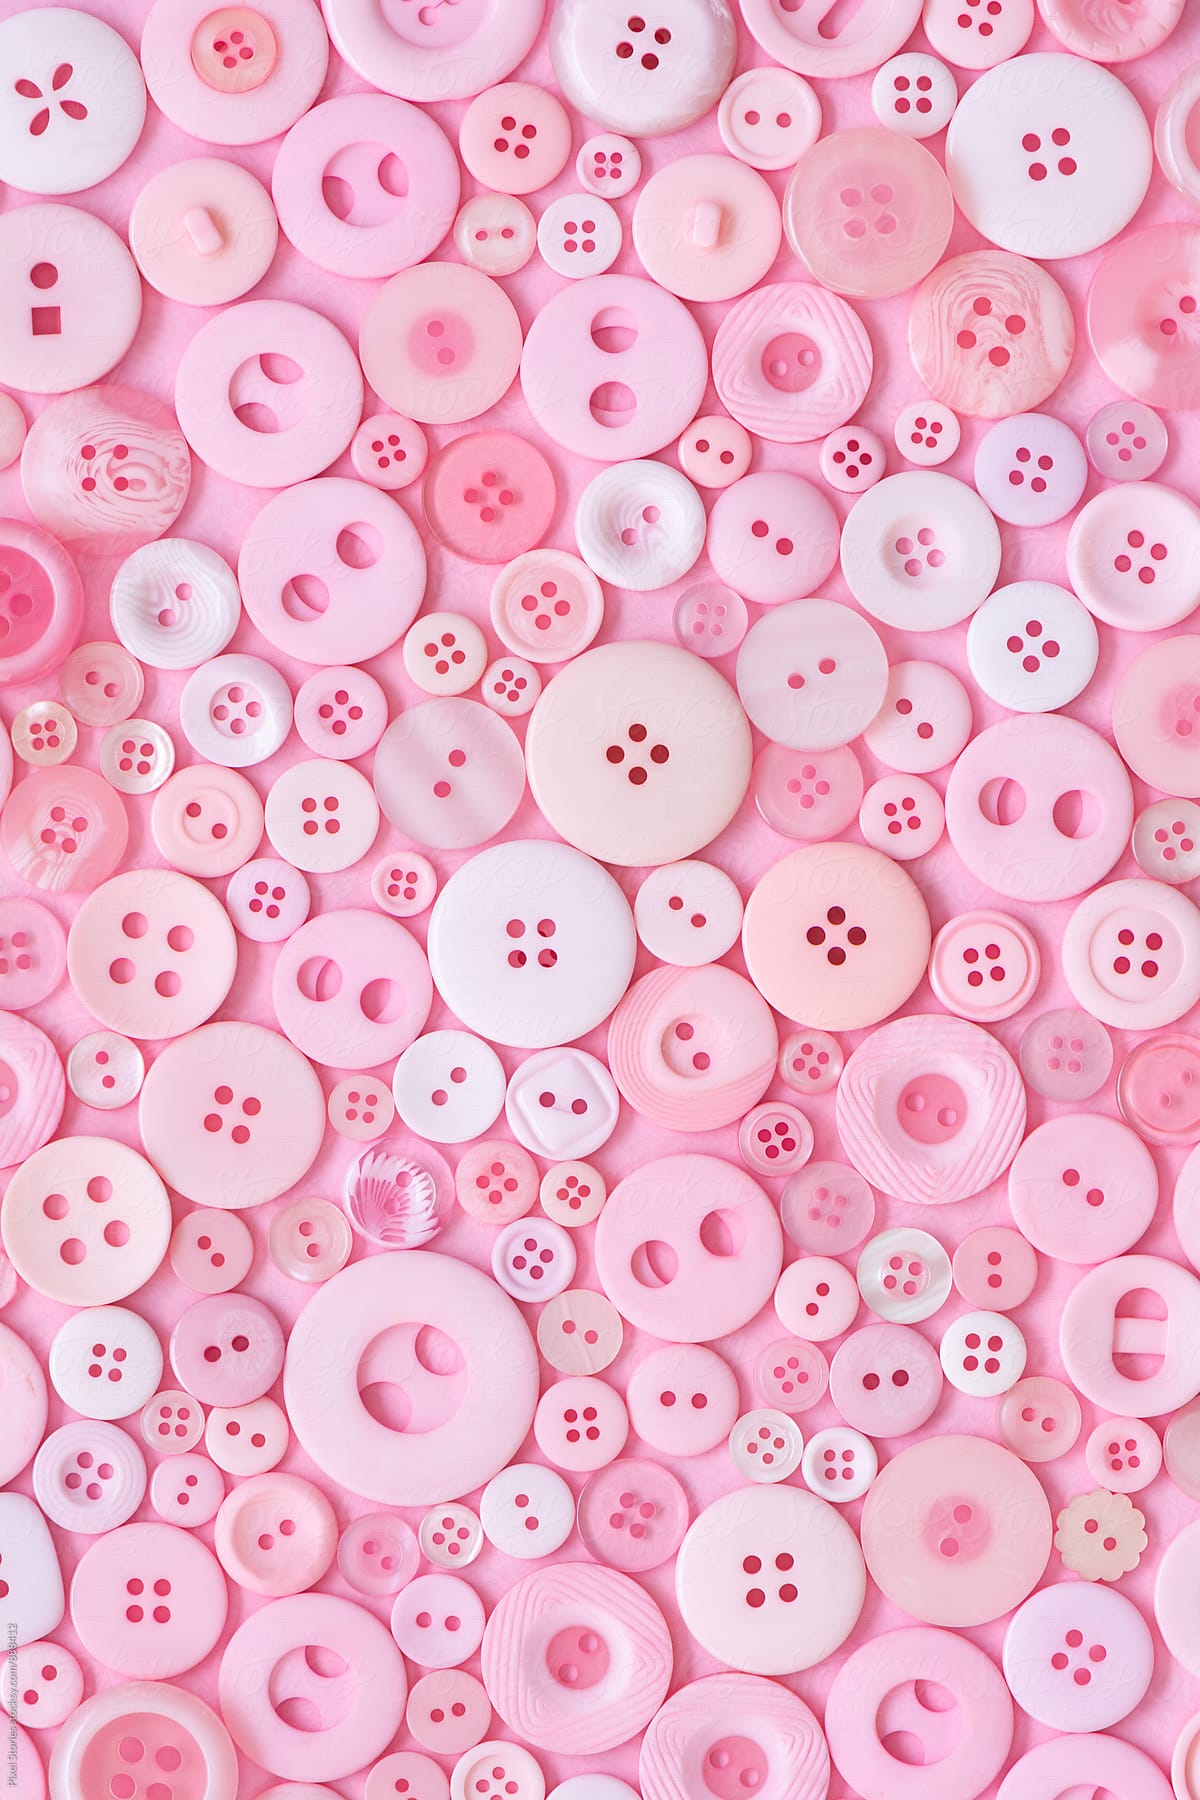 Pink Buttons Background by Stocksy Contributor Pixel Stories - Stocksy